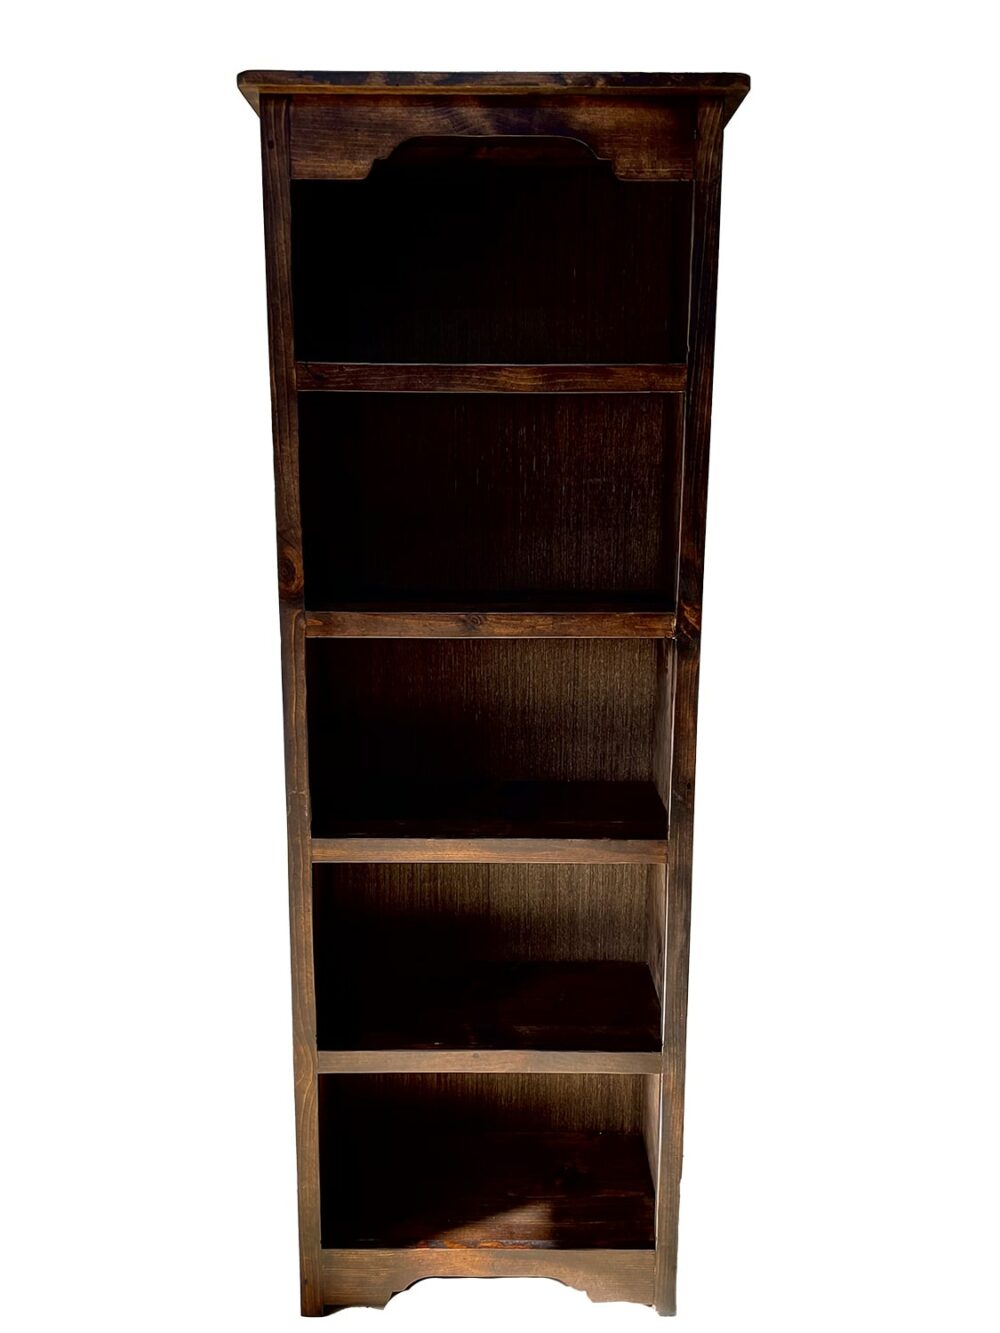 Introducing the Curio Bookcase: Mexican Pine Wooden Bookshelf Experience the perfect harmony of rustic elegance and practical design with our Curio Bookcase. Handcrafted in Mexico from high-quality kiln-dried pine, this exquisite bookshelf is a testament to fine craftsmanship and timeless appeal.